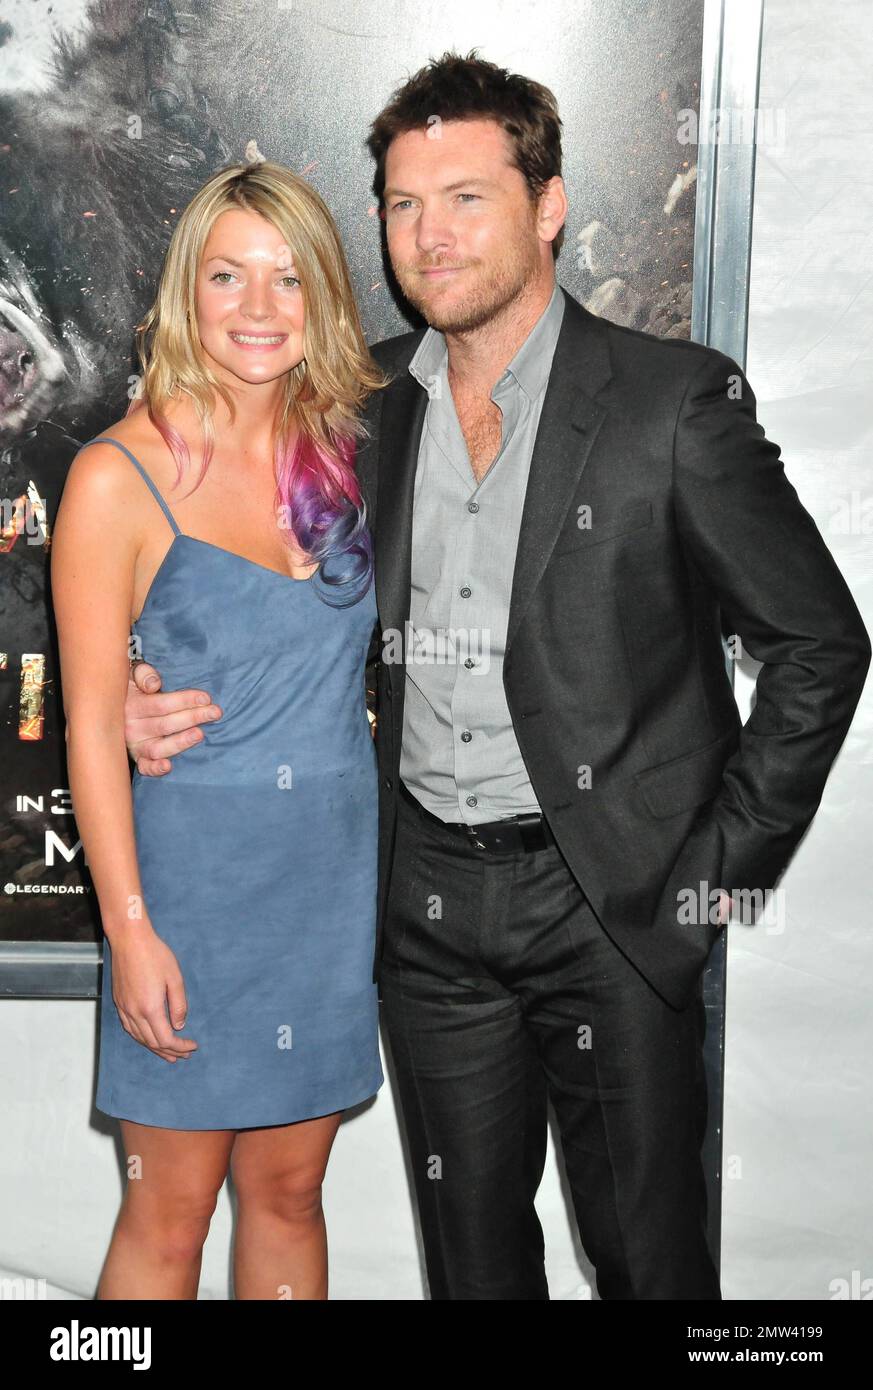 Sam Worthington and wife at the premiere of "Wrath of the Titans" at the AMC Lincoln Square. New York, NY. 26th March 2012. Stock Photo